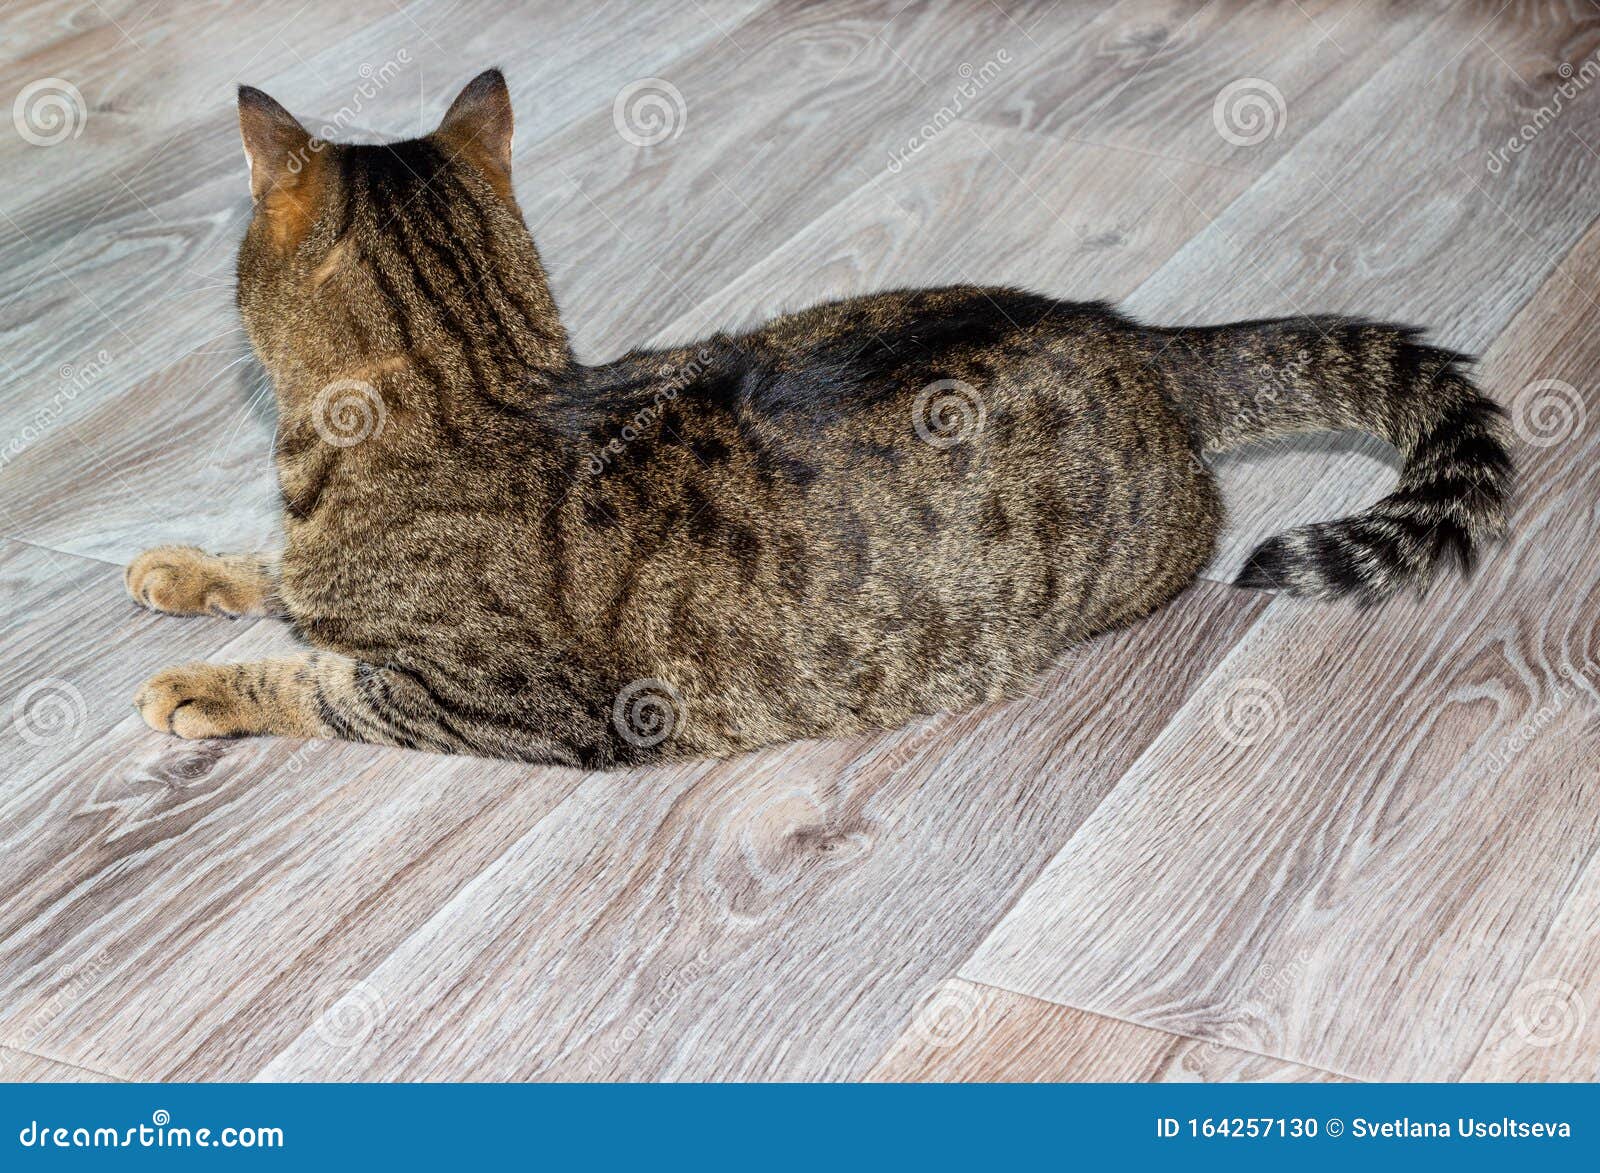 European Shorthair Cat Lies On The Floor View From The Back Of A